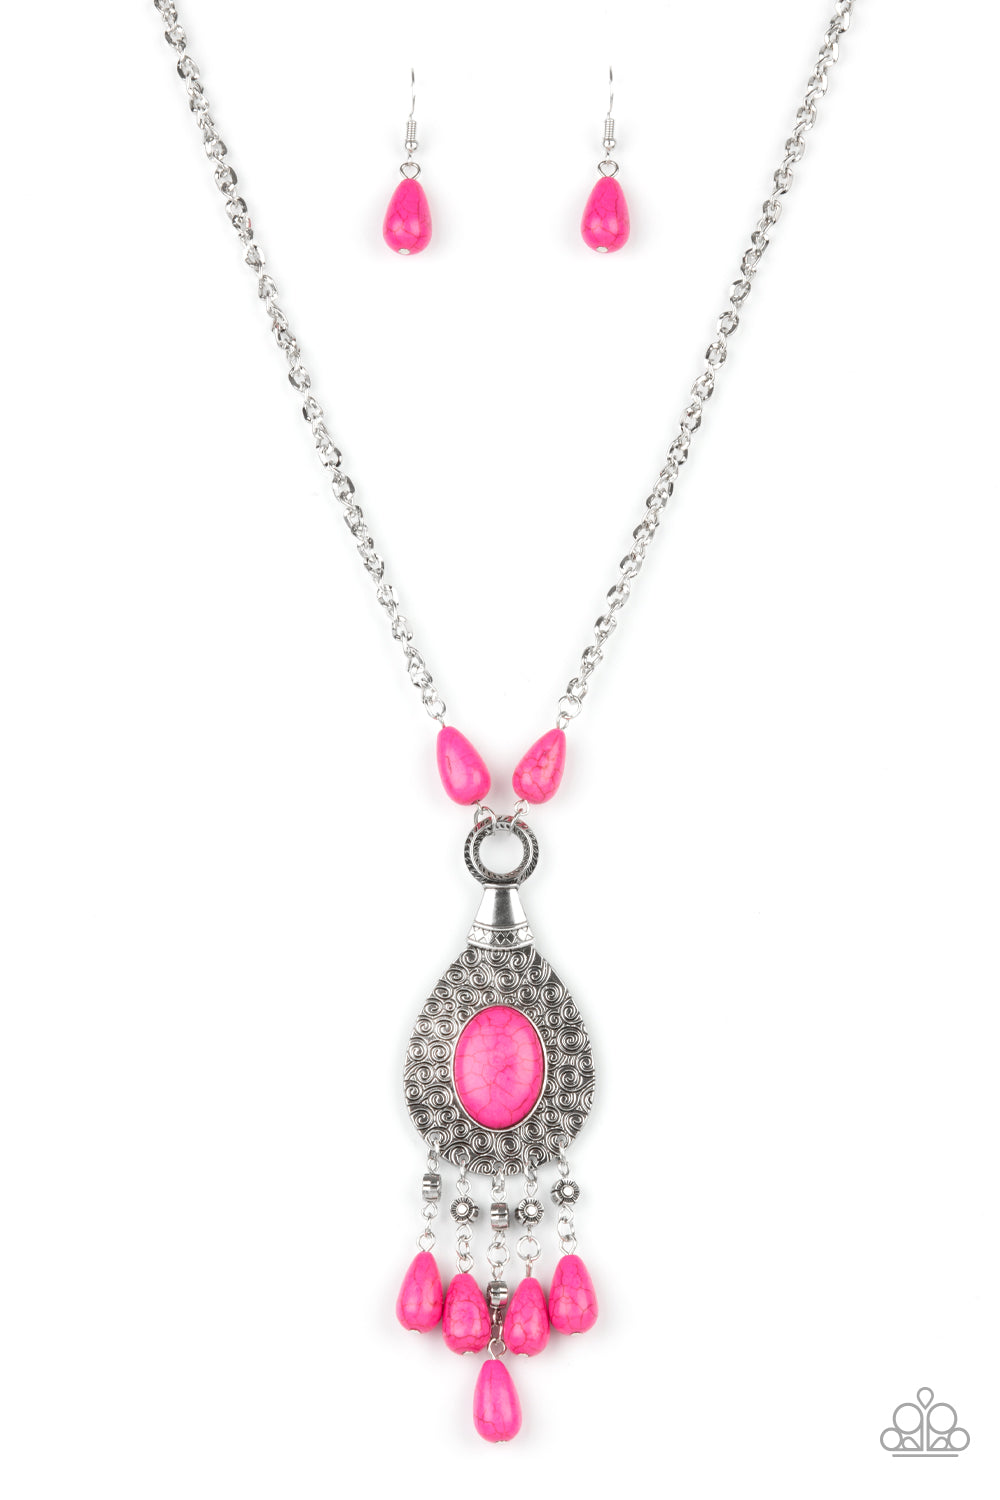 Paparazzi - Cowgirl Couture - Pink necklace